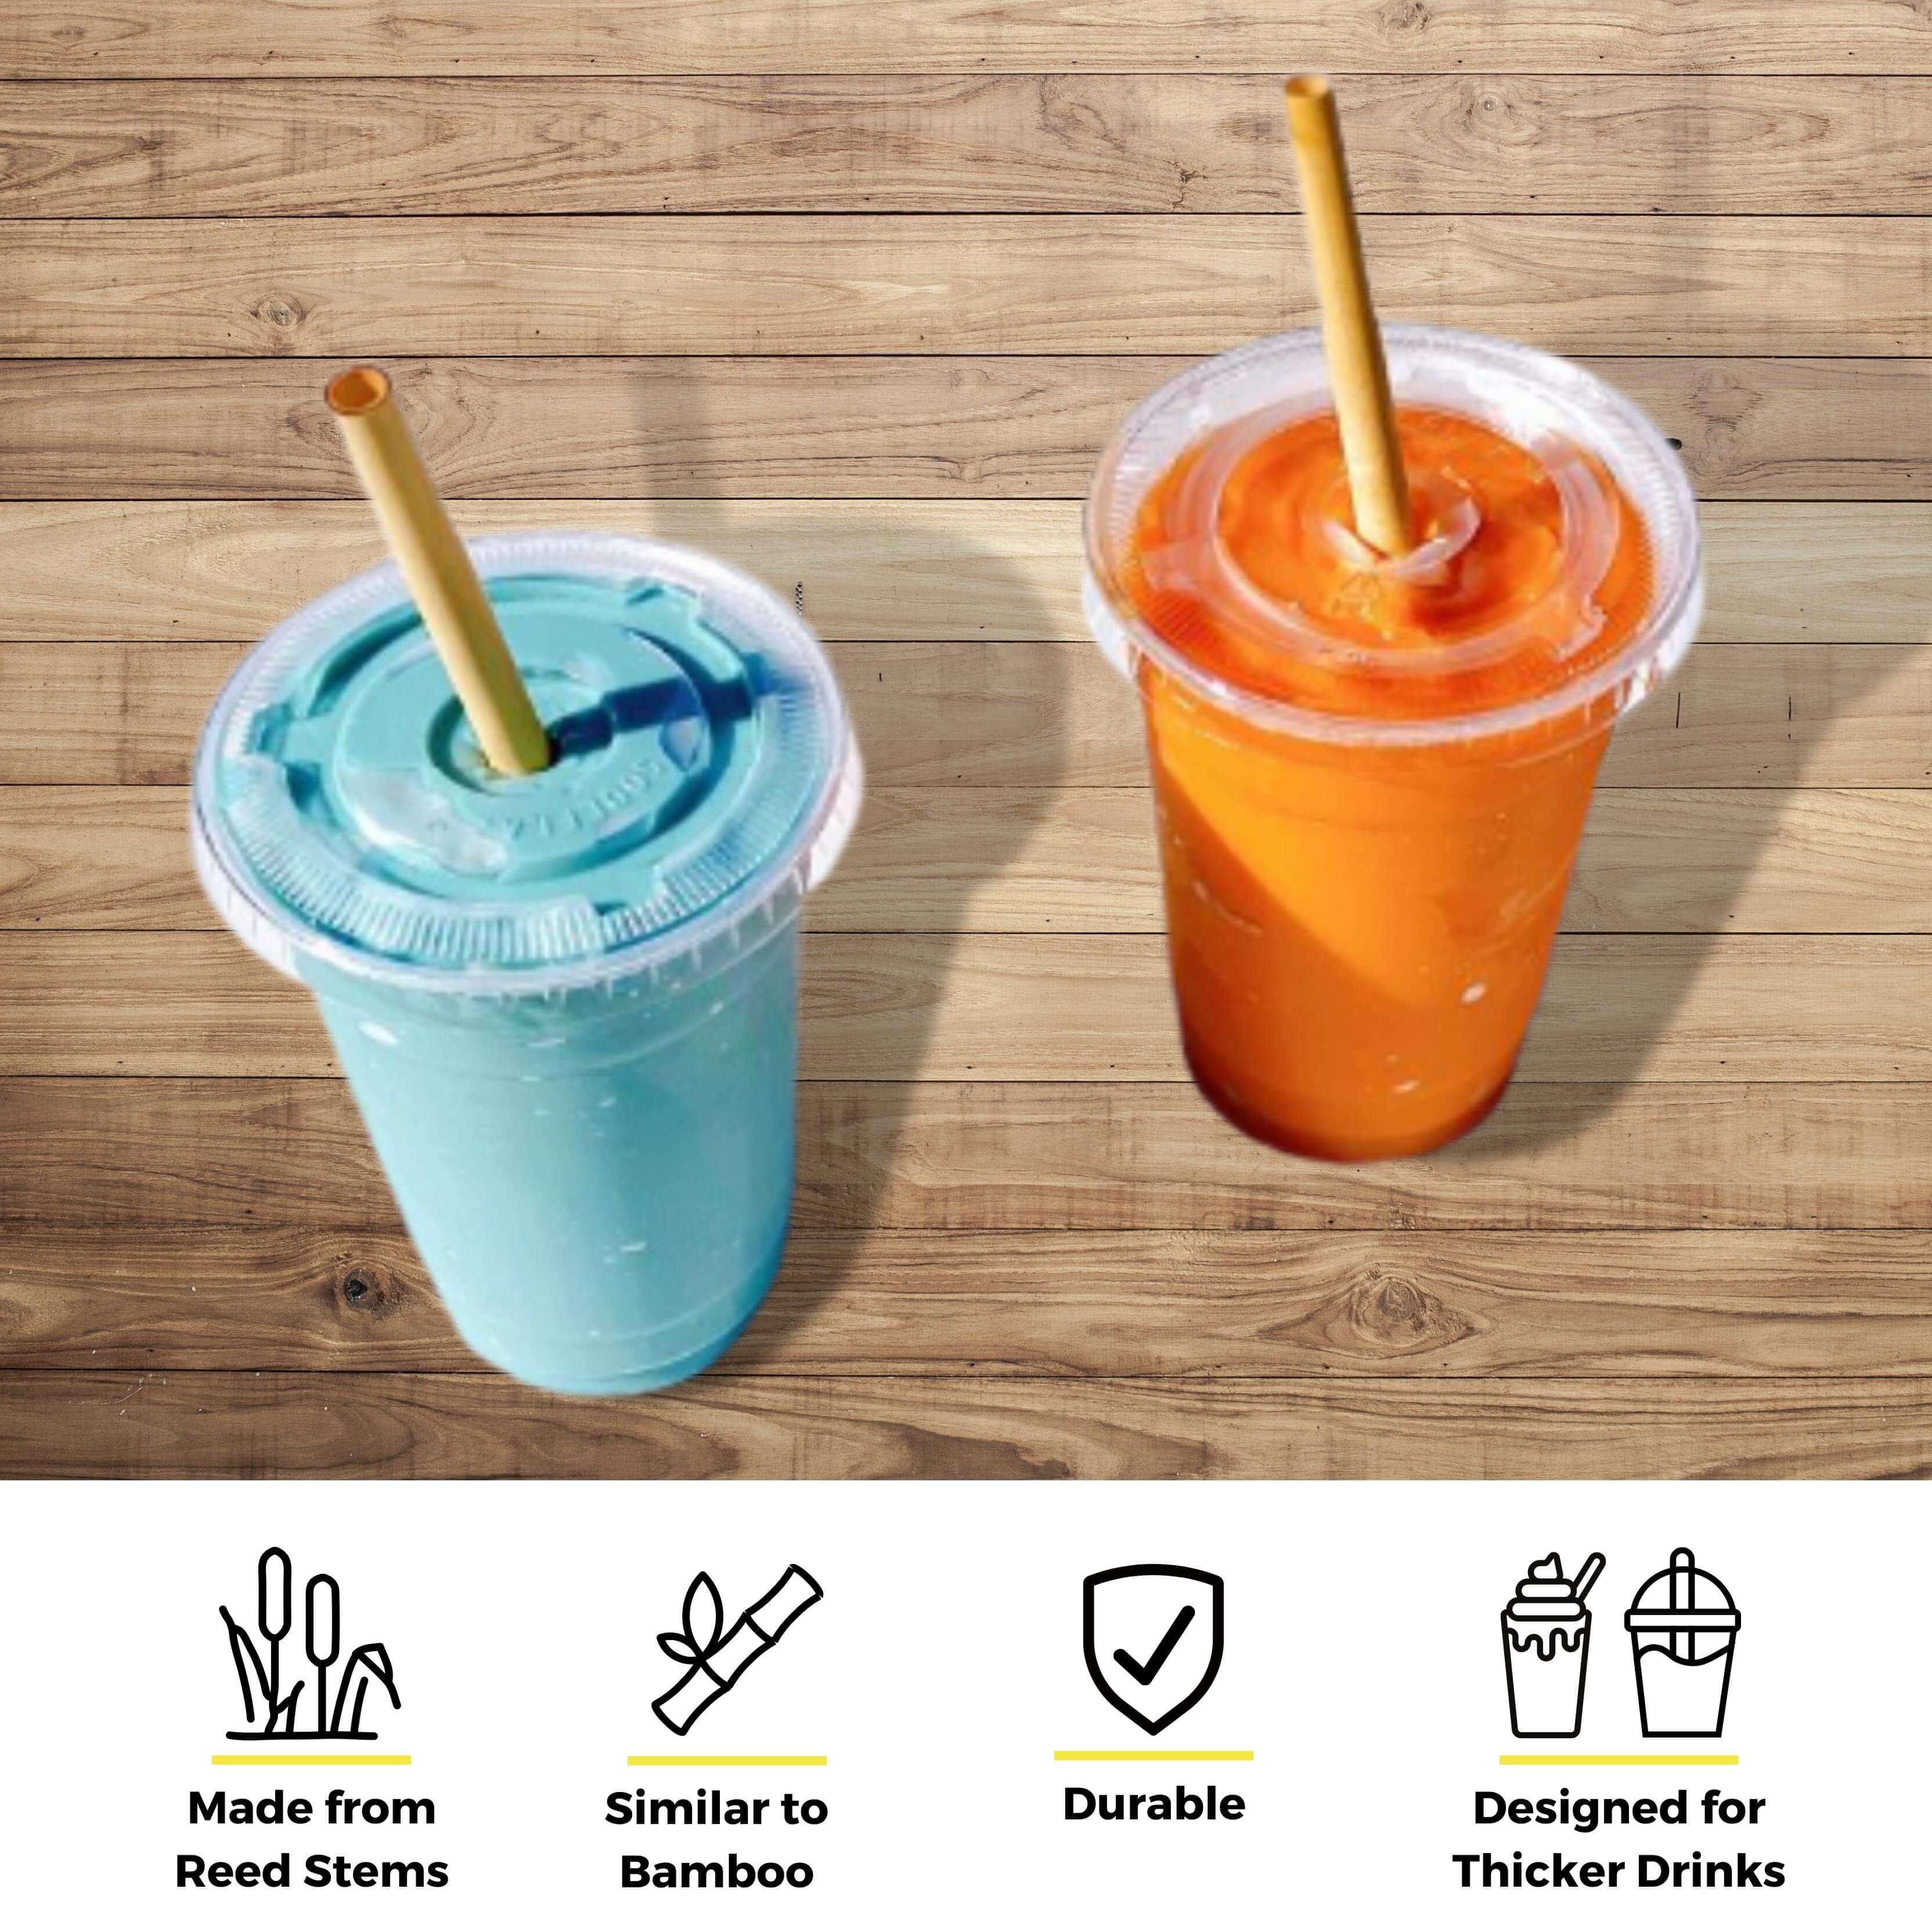 Two smoothies are placed side by side on a wooden surface. The left drink is blue, while the right one is orange. Both are in clear cups with biodegradable bamboo-like straws inserted through the lids. At the bottom, four icons illustrate that the straws are made from reed stems, similar to bamboo, durable, and designed for thicker drinks such as smoothies and shakes.